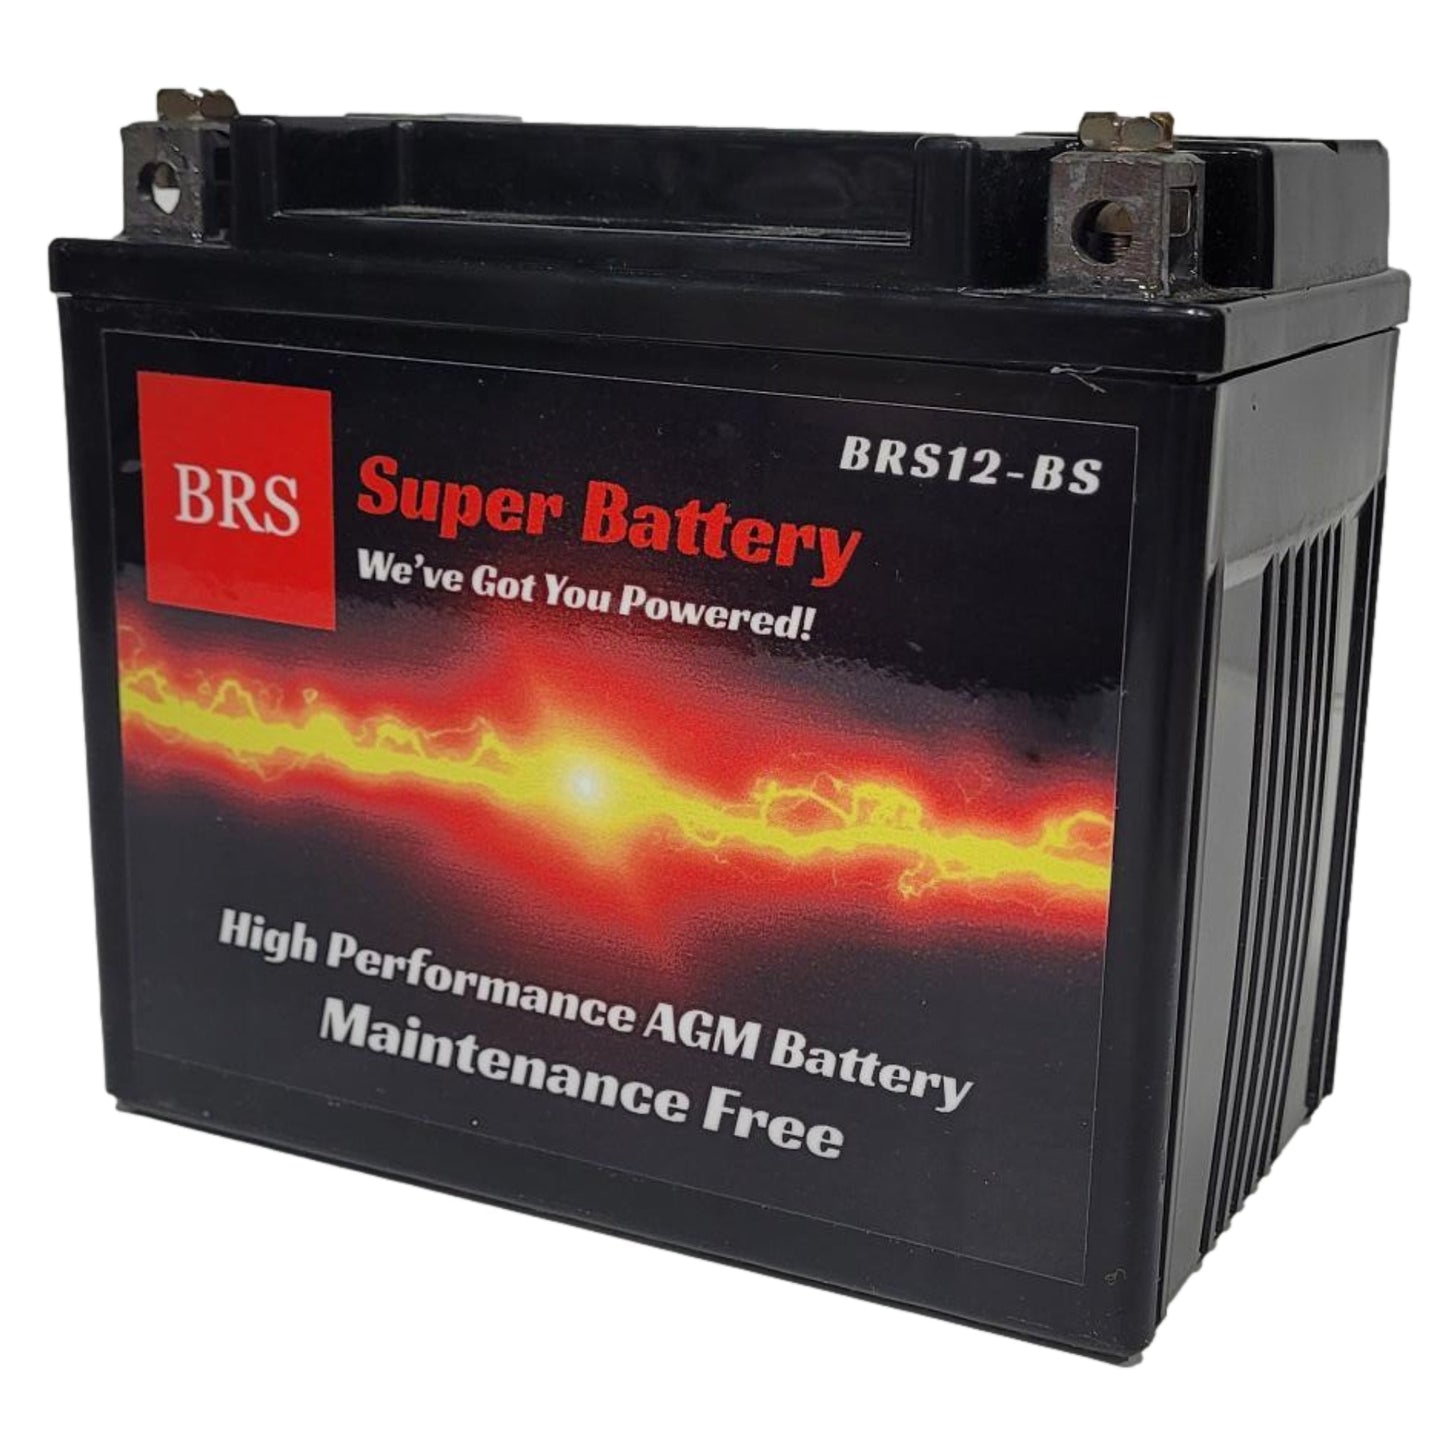 High Performance BRS12-BS 10 Year Battery & Smart Charger / Maintainer Combo Bundle Kit 12v Sealed AGM PowerSports Battery - BRS Super Battery